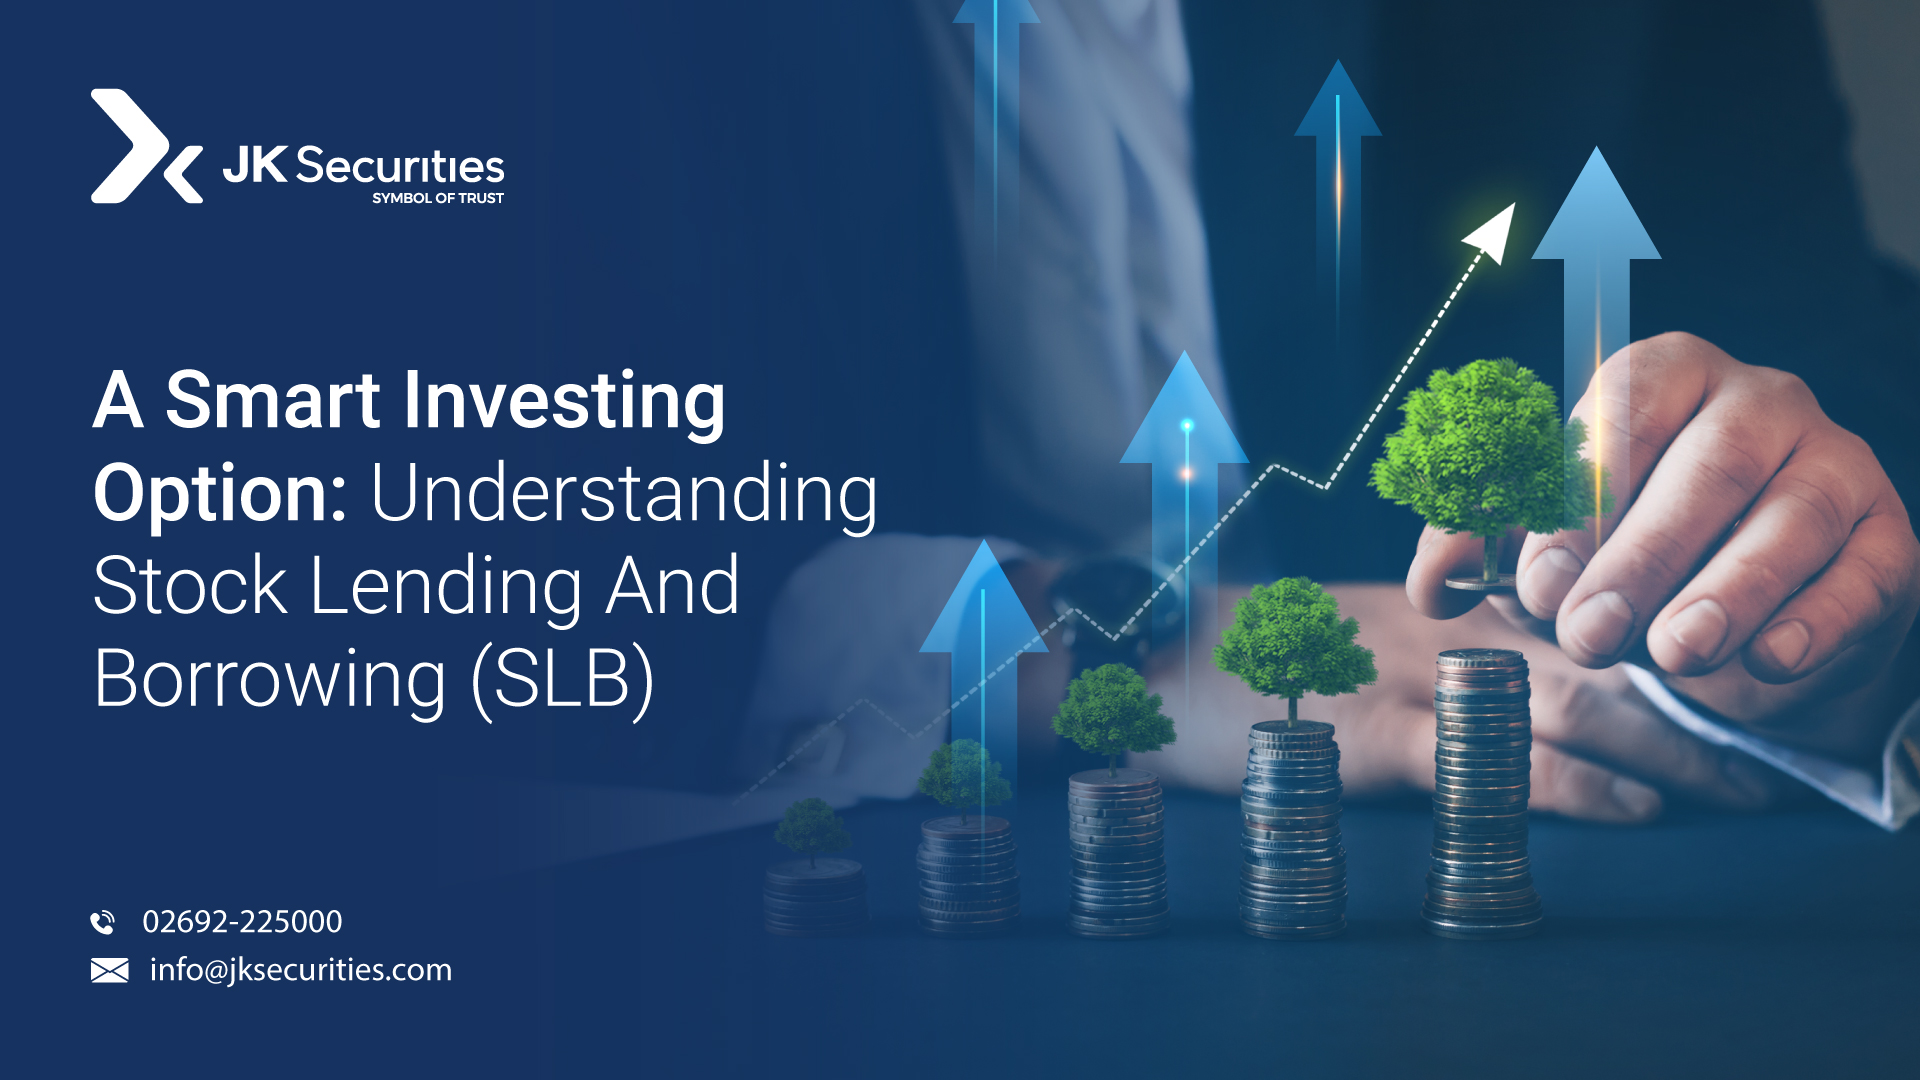 A Smart Investing Option: Understanding Stock Lending And Borrowing (SLB) 